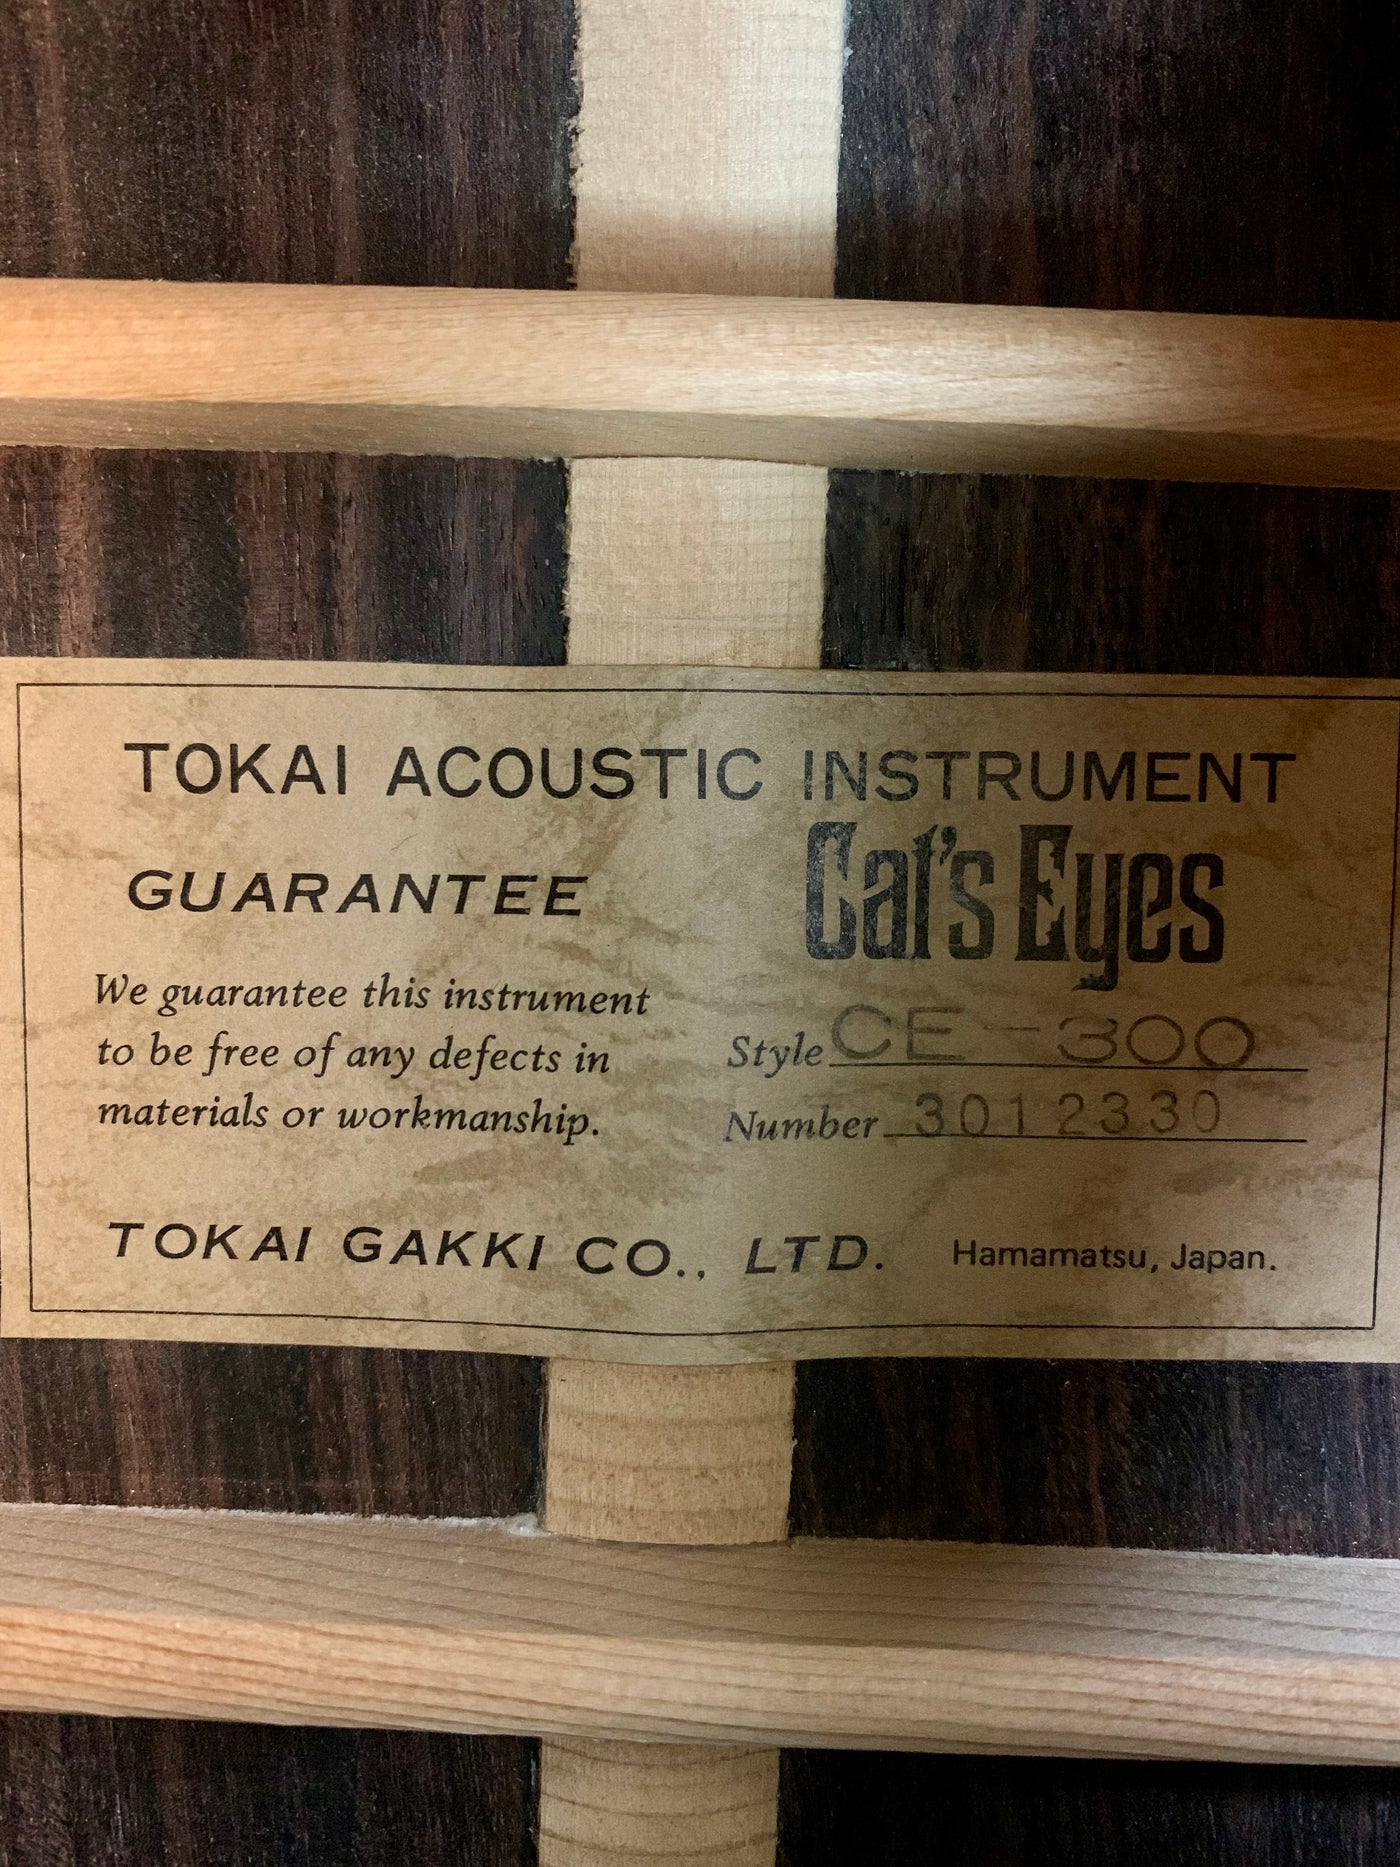 Tokai Cat's Eyes CE-300 Vintage Acoustic Guitar MIJ 1983 Natural Made in Japan w/ Hard Case